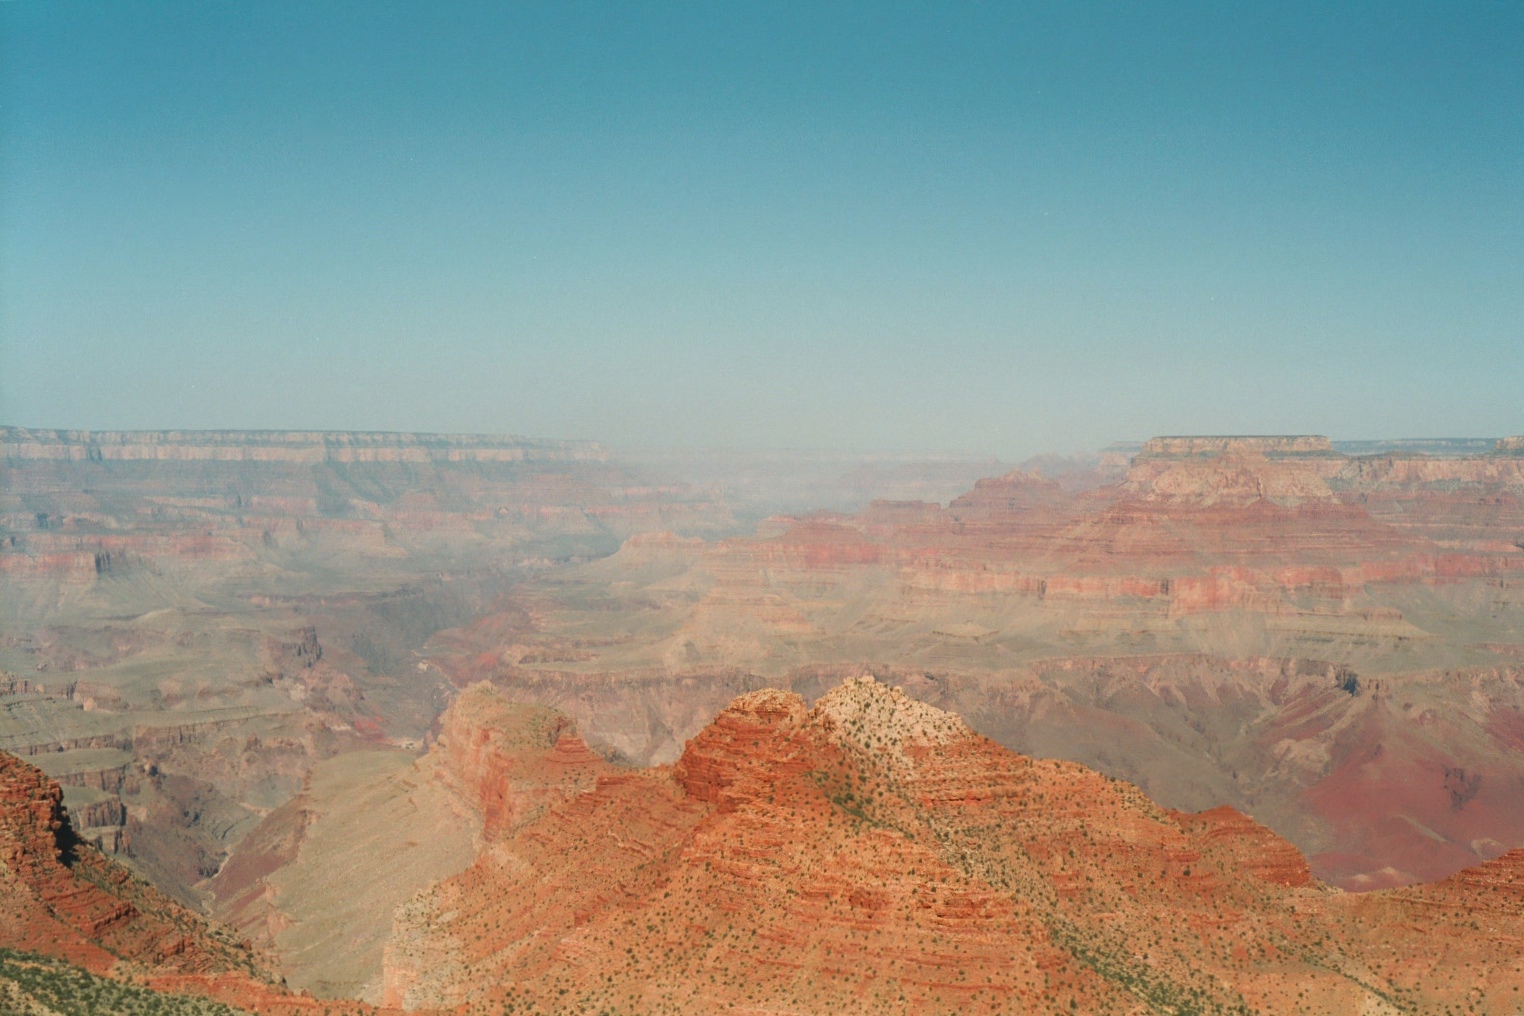 A wide expanse of the Canyon’s red rocks, looking like somewhere on Mars.